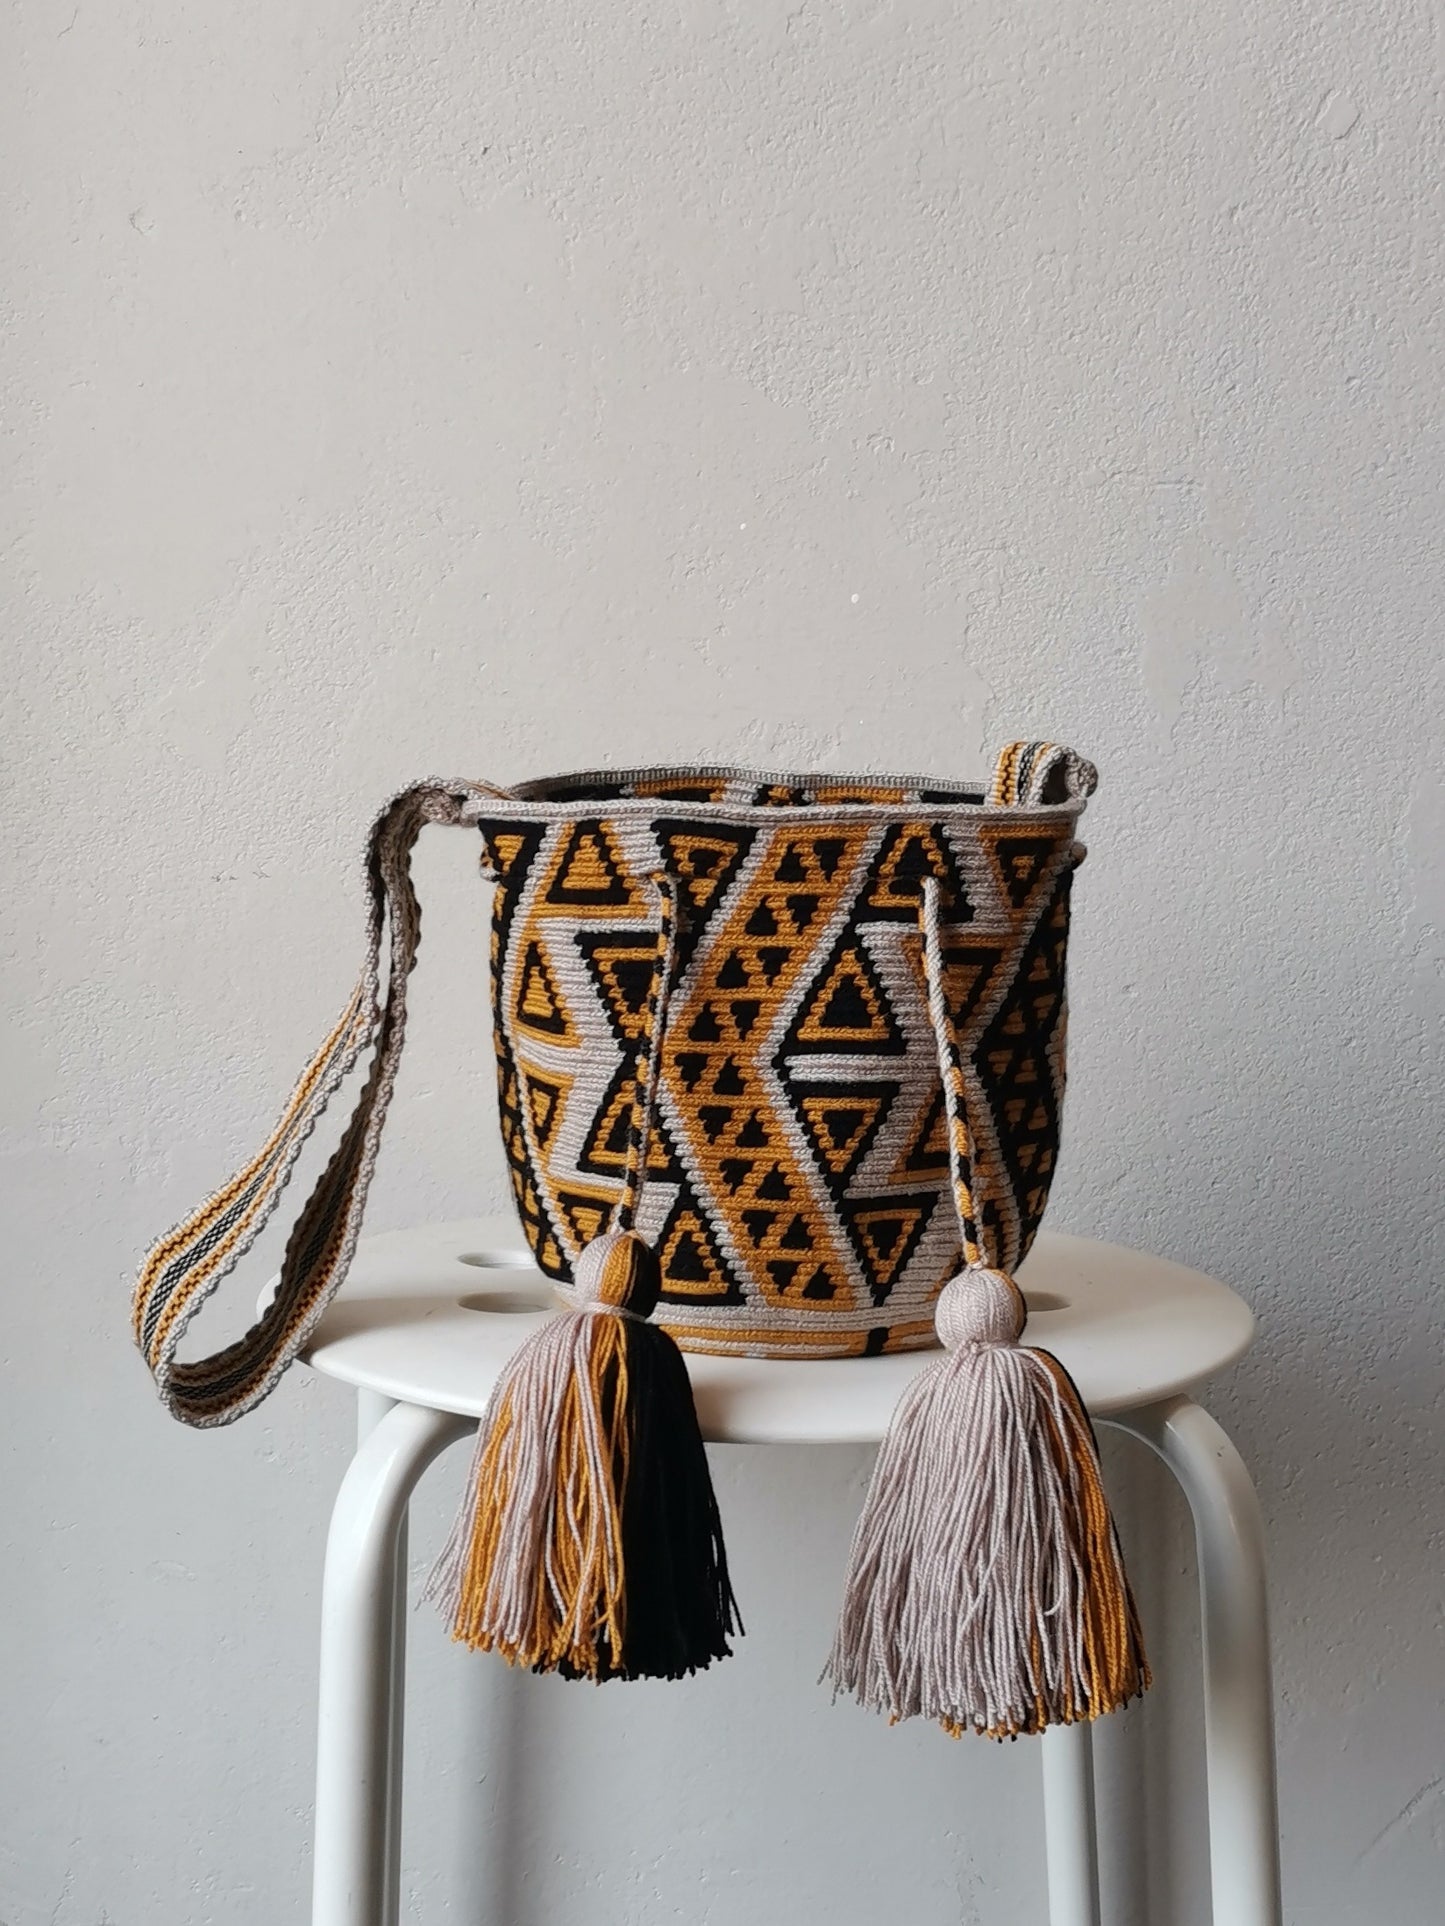 END OF SERIES - Beige and yellow S mochila shoulder bag